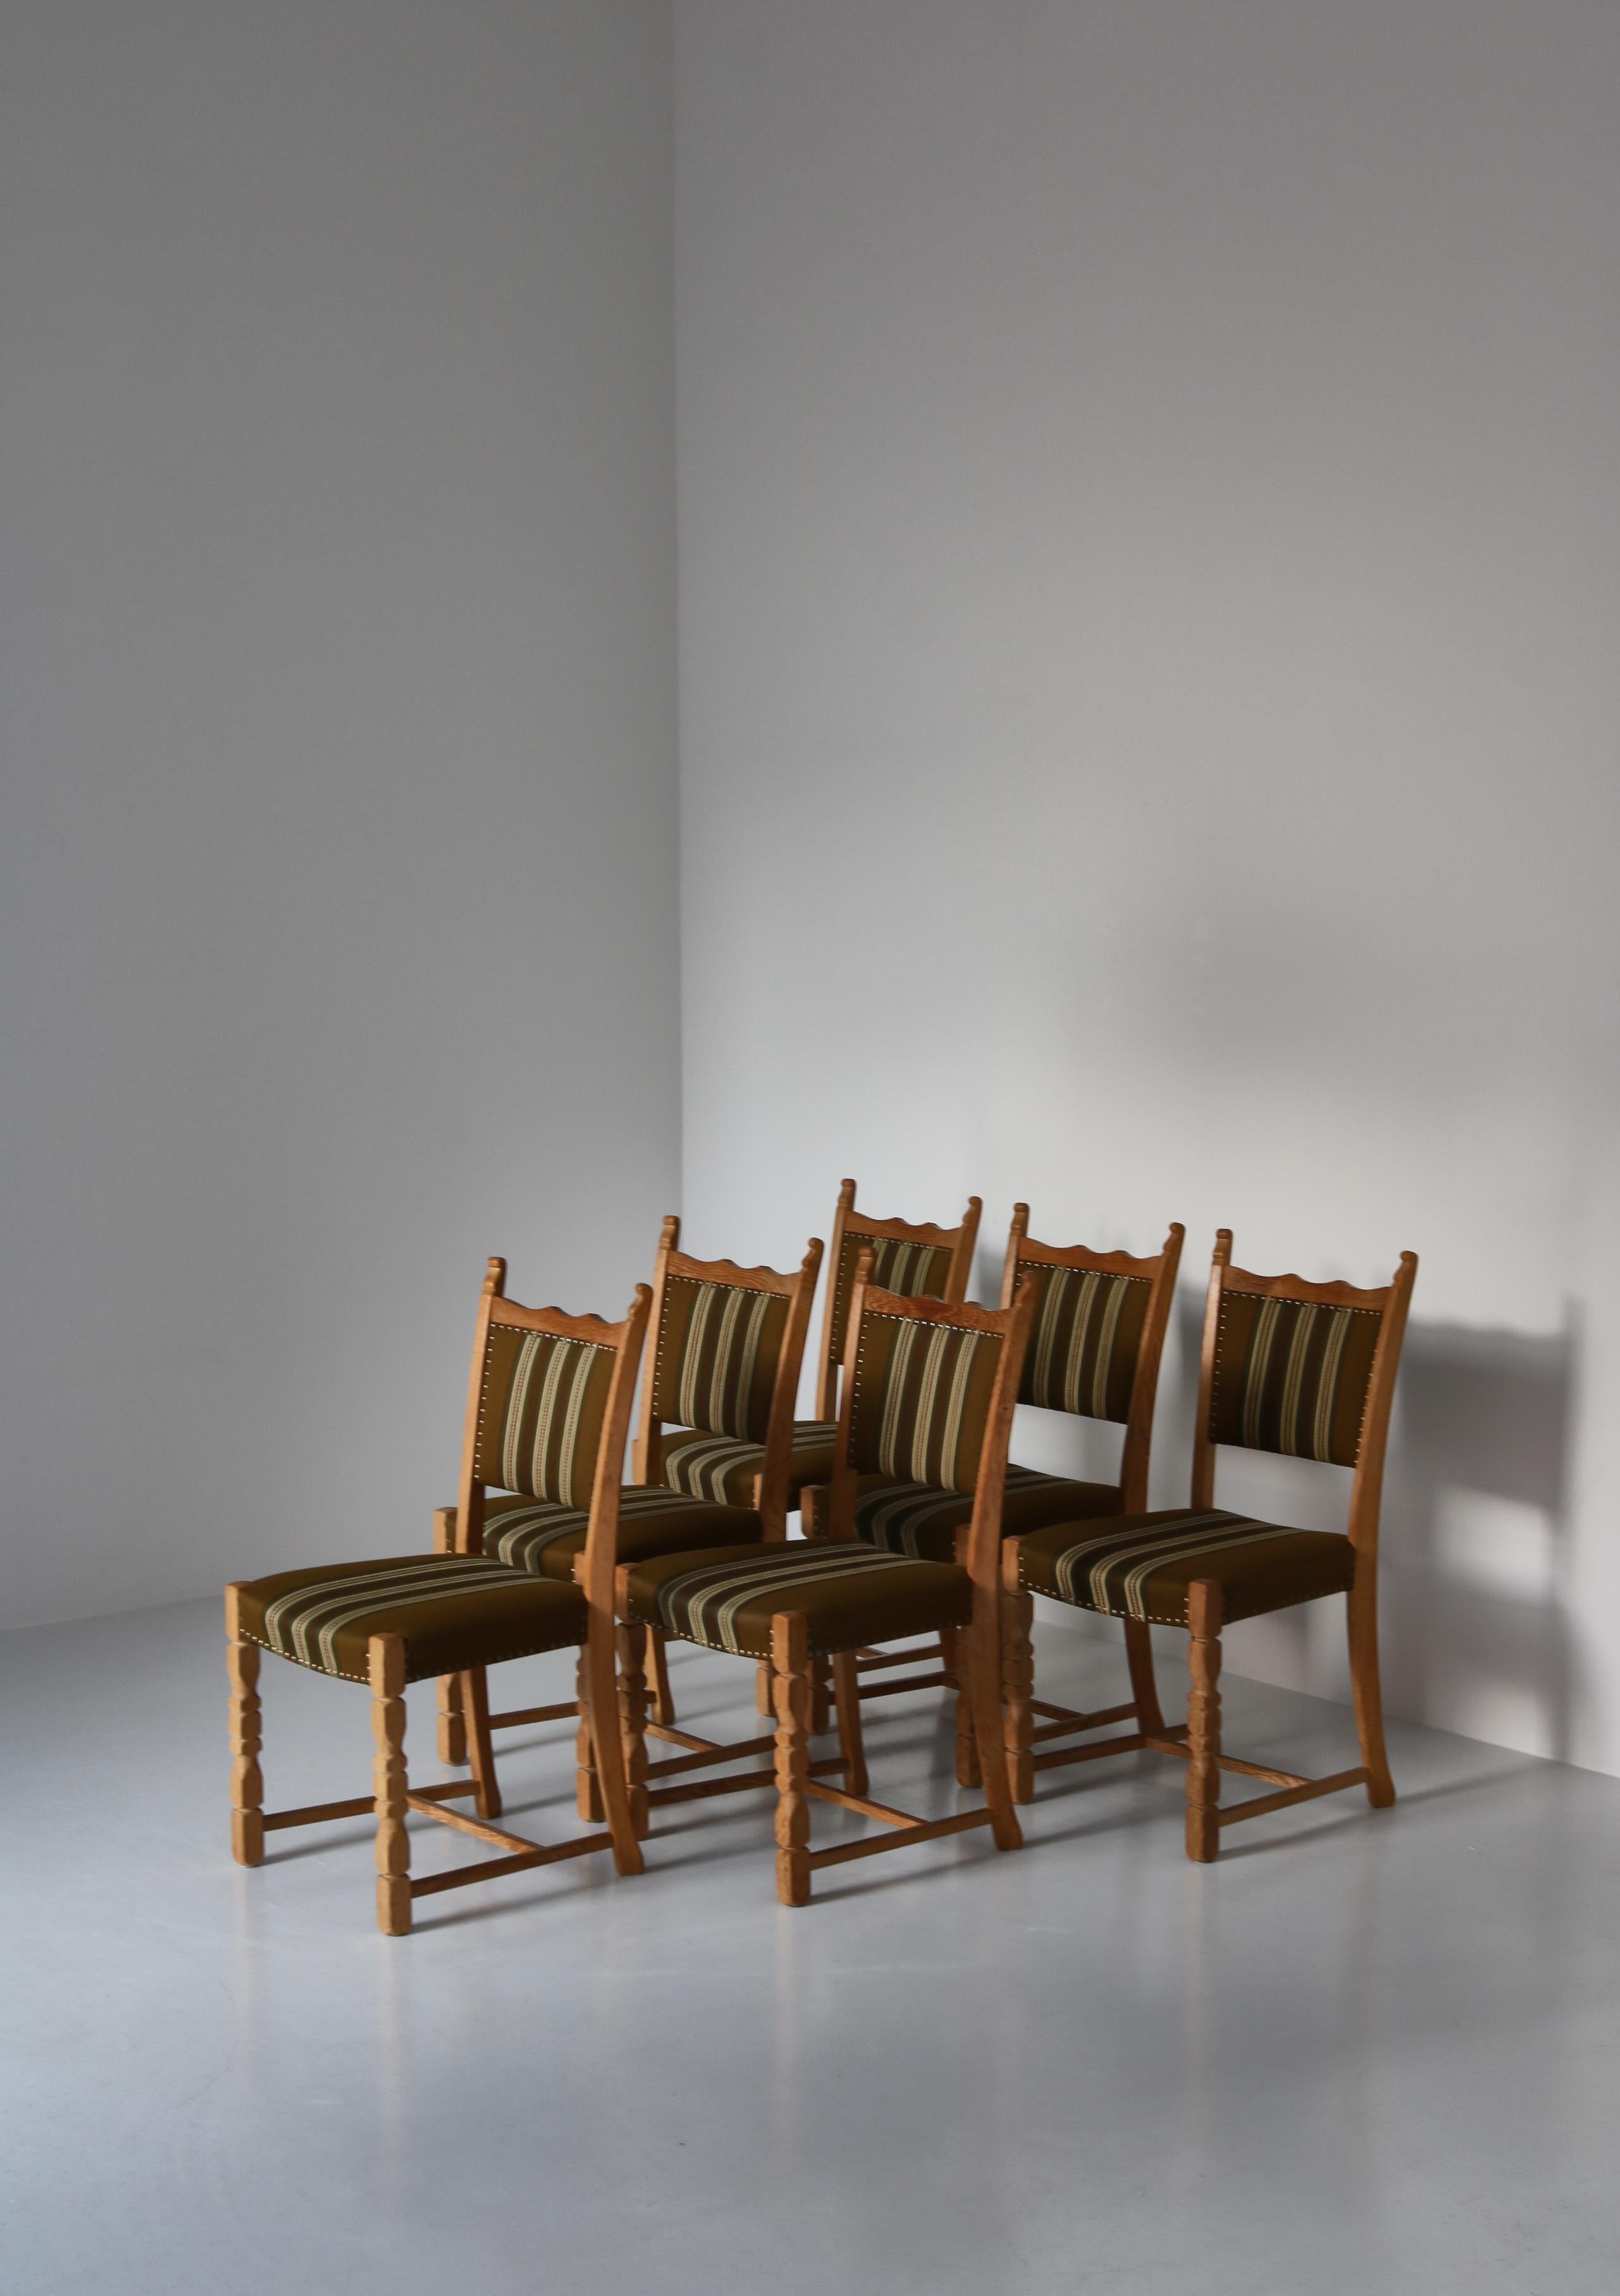 Vintage dining chairs in solid patinated Scandinavian oak tree and original wool upholstery. This model was designed in the 1960s and is ascribed to Henry Kjærnulff, Denmark. The style is modern but with playful hints to historical chairs. The frame